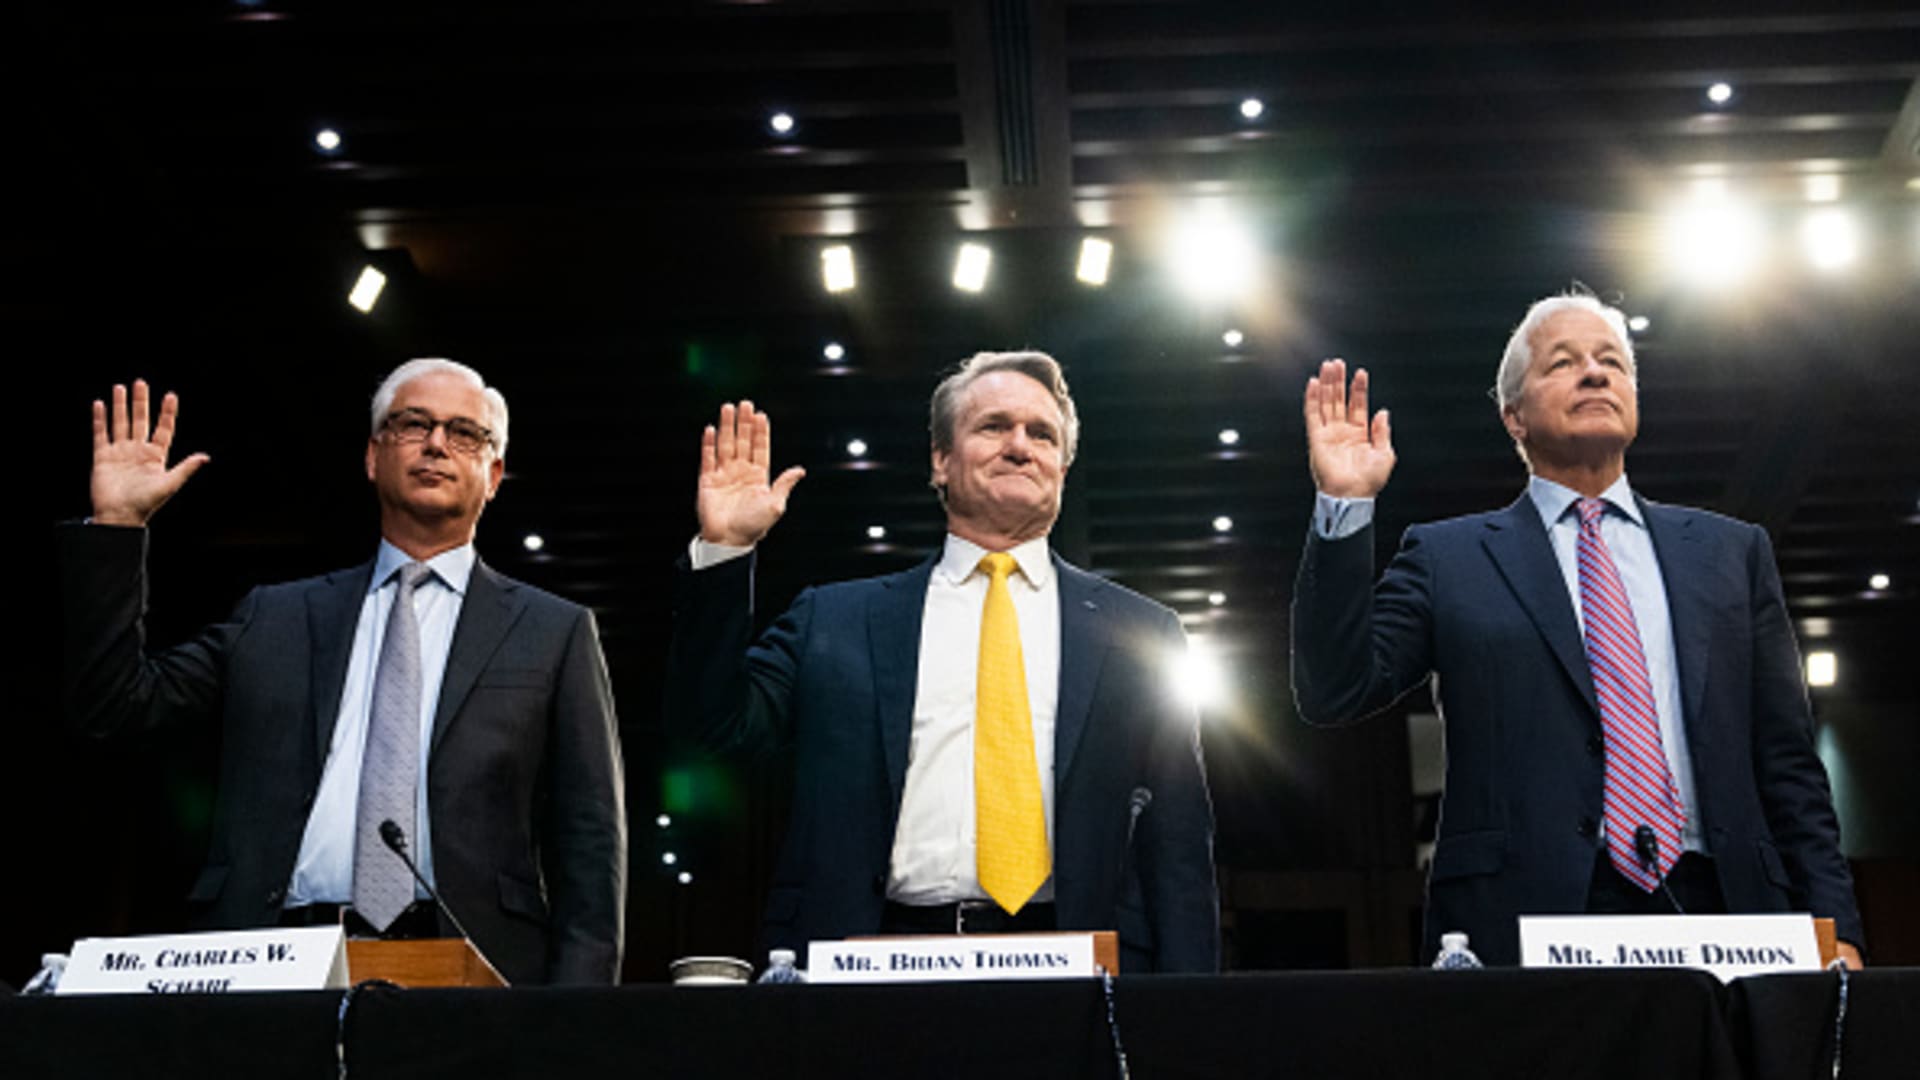 Charles Scharf, CEO of Wells Fargo, Brian Moynihan, CEO of Bank of America, and Jamie Dimon, CEO of JPMorgan Chase, are sworn in during the Senate Banking, Housing, and Urban Affairs Committee hearing titled Annual Oversight of the Nations Largest Banks, in Hart Building on Thursday, September 22, 2022.